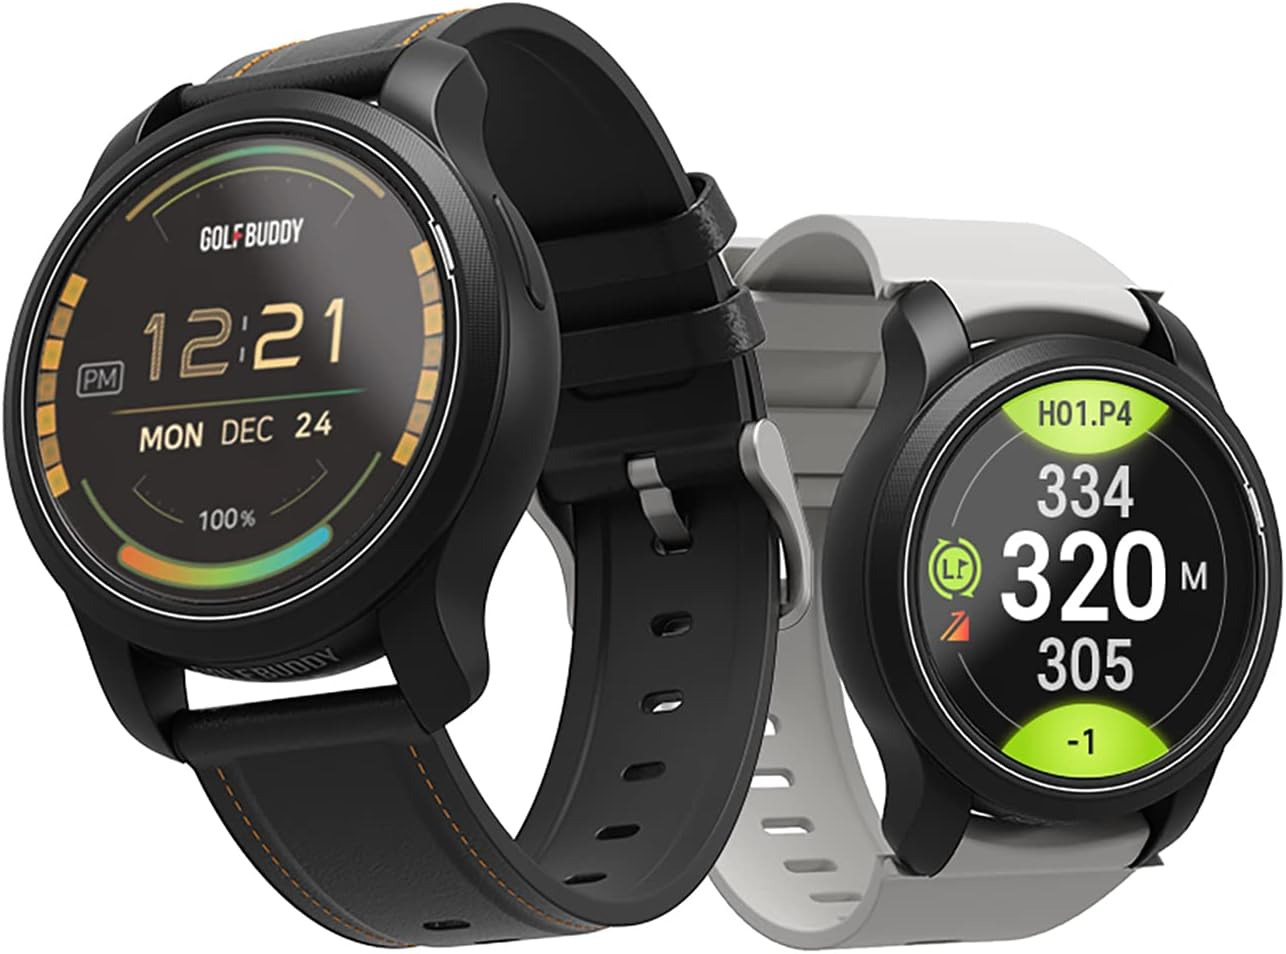 Aim W12 Golf GPS Watch, Premium Full Color Touchscreen, Preloaded with 40,000 Wo